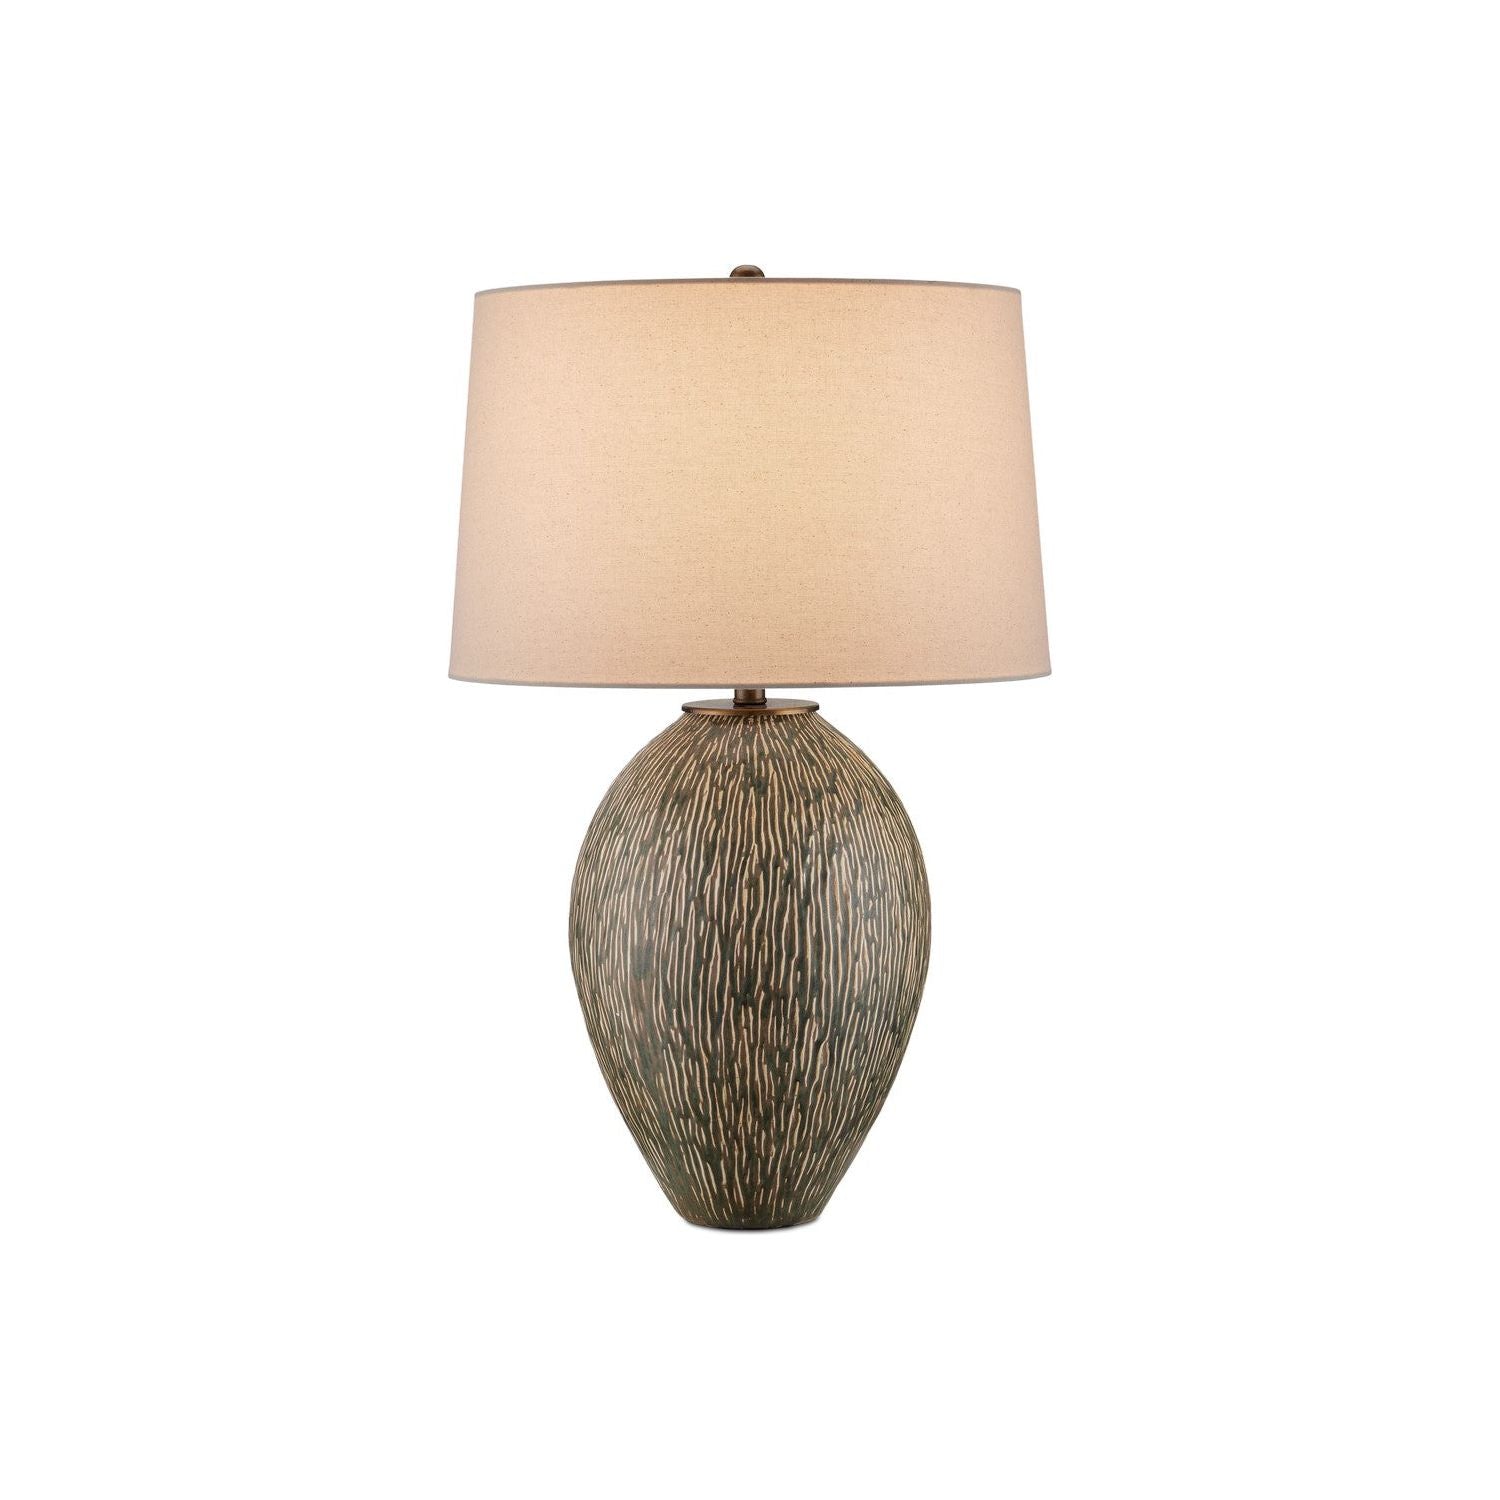 Currey and Company - 6000-0937 - One Light Table Lamp - Olive Green/Beige/Off-White/Antique Brass